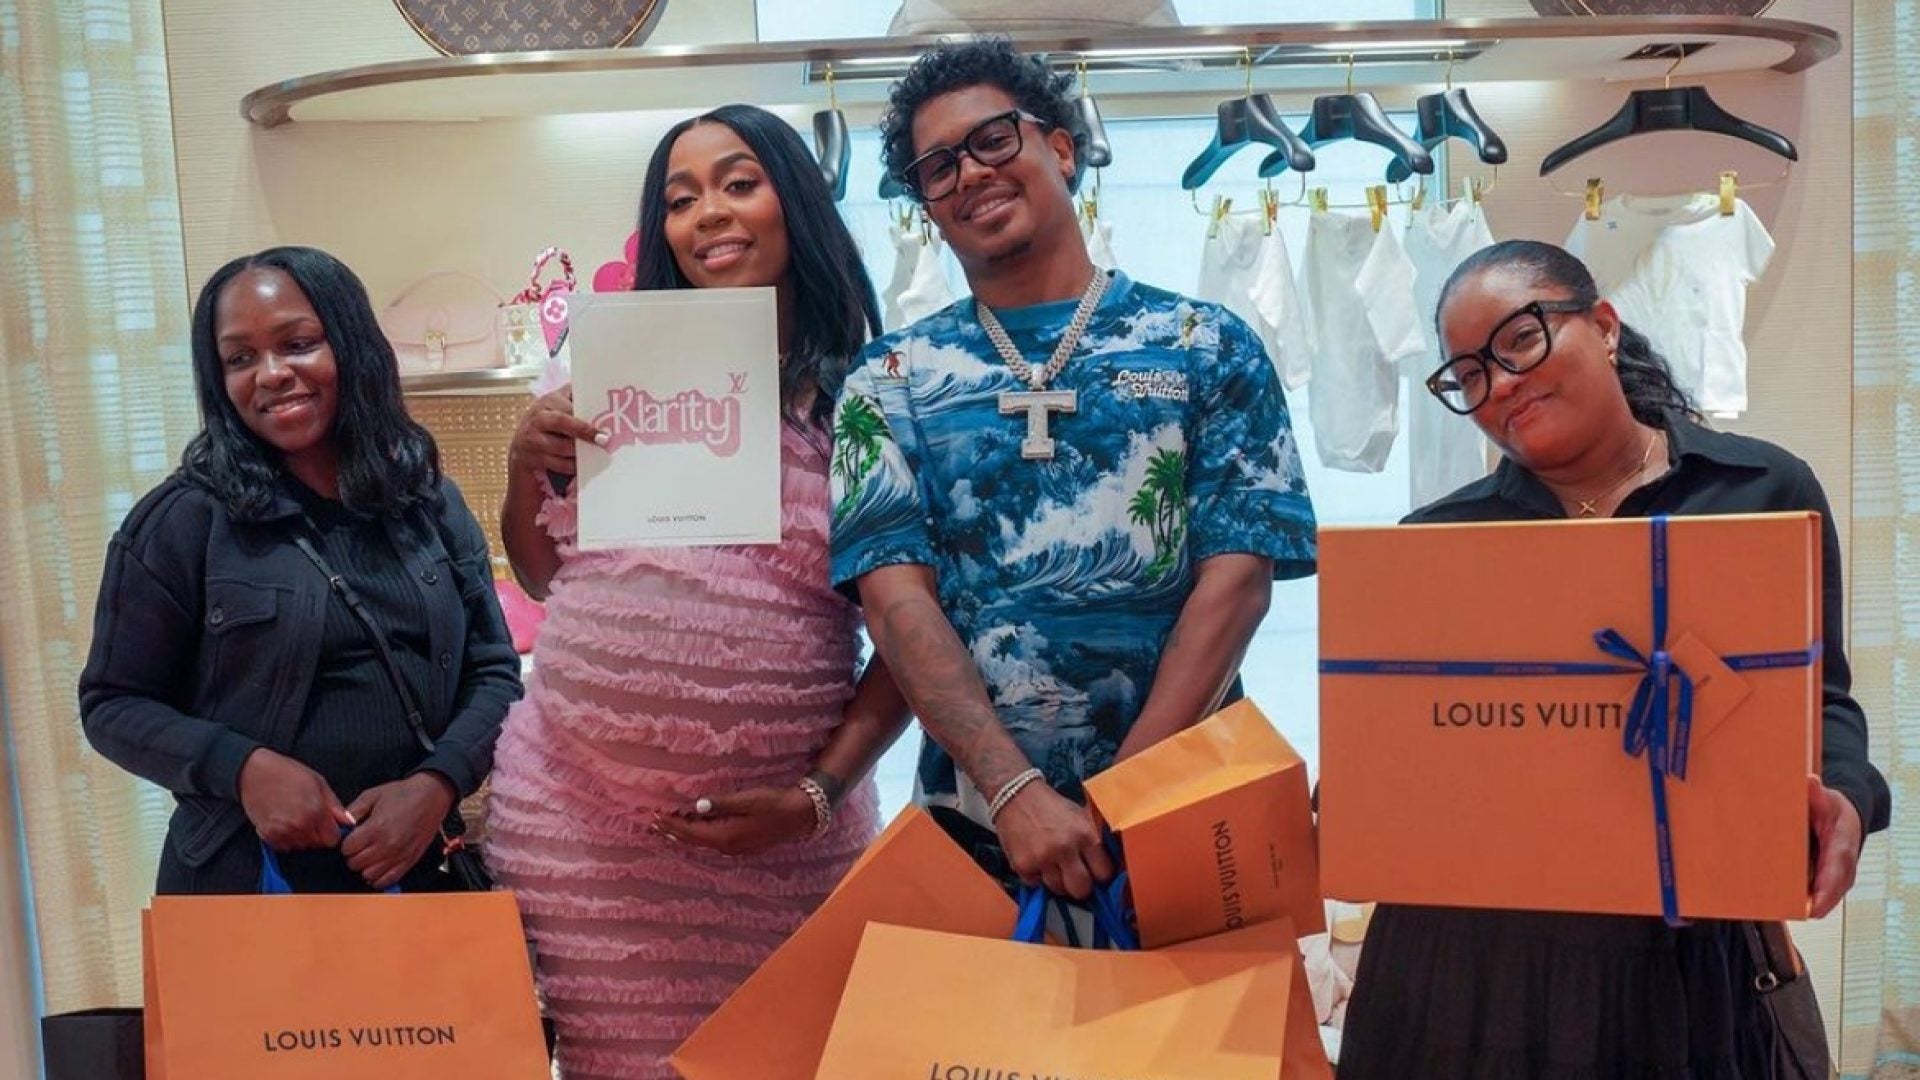 Kash Doll Responds To People Criticizing Her Baby Shower At The Louis Vuitton Store